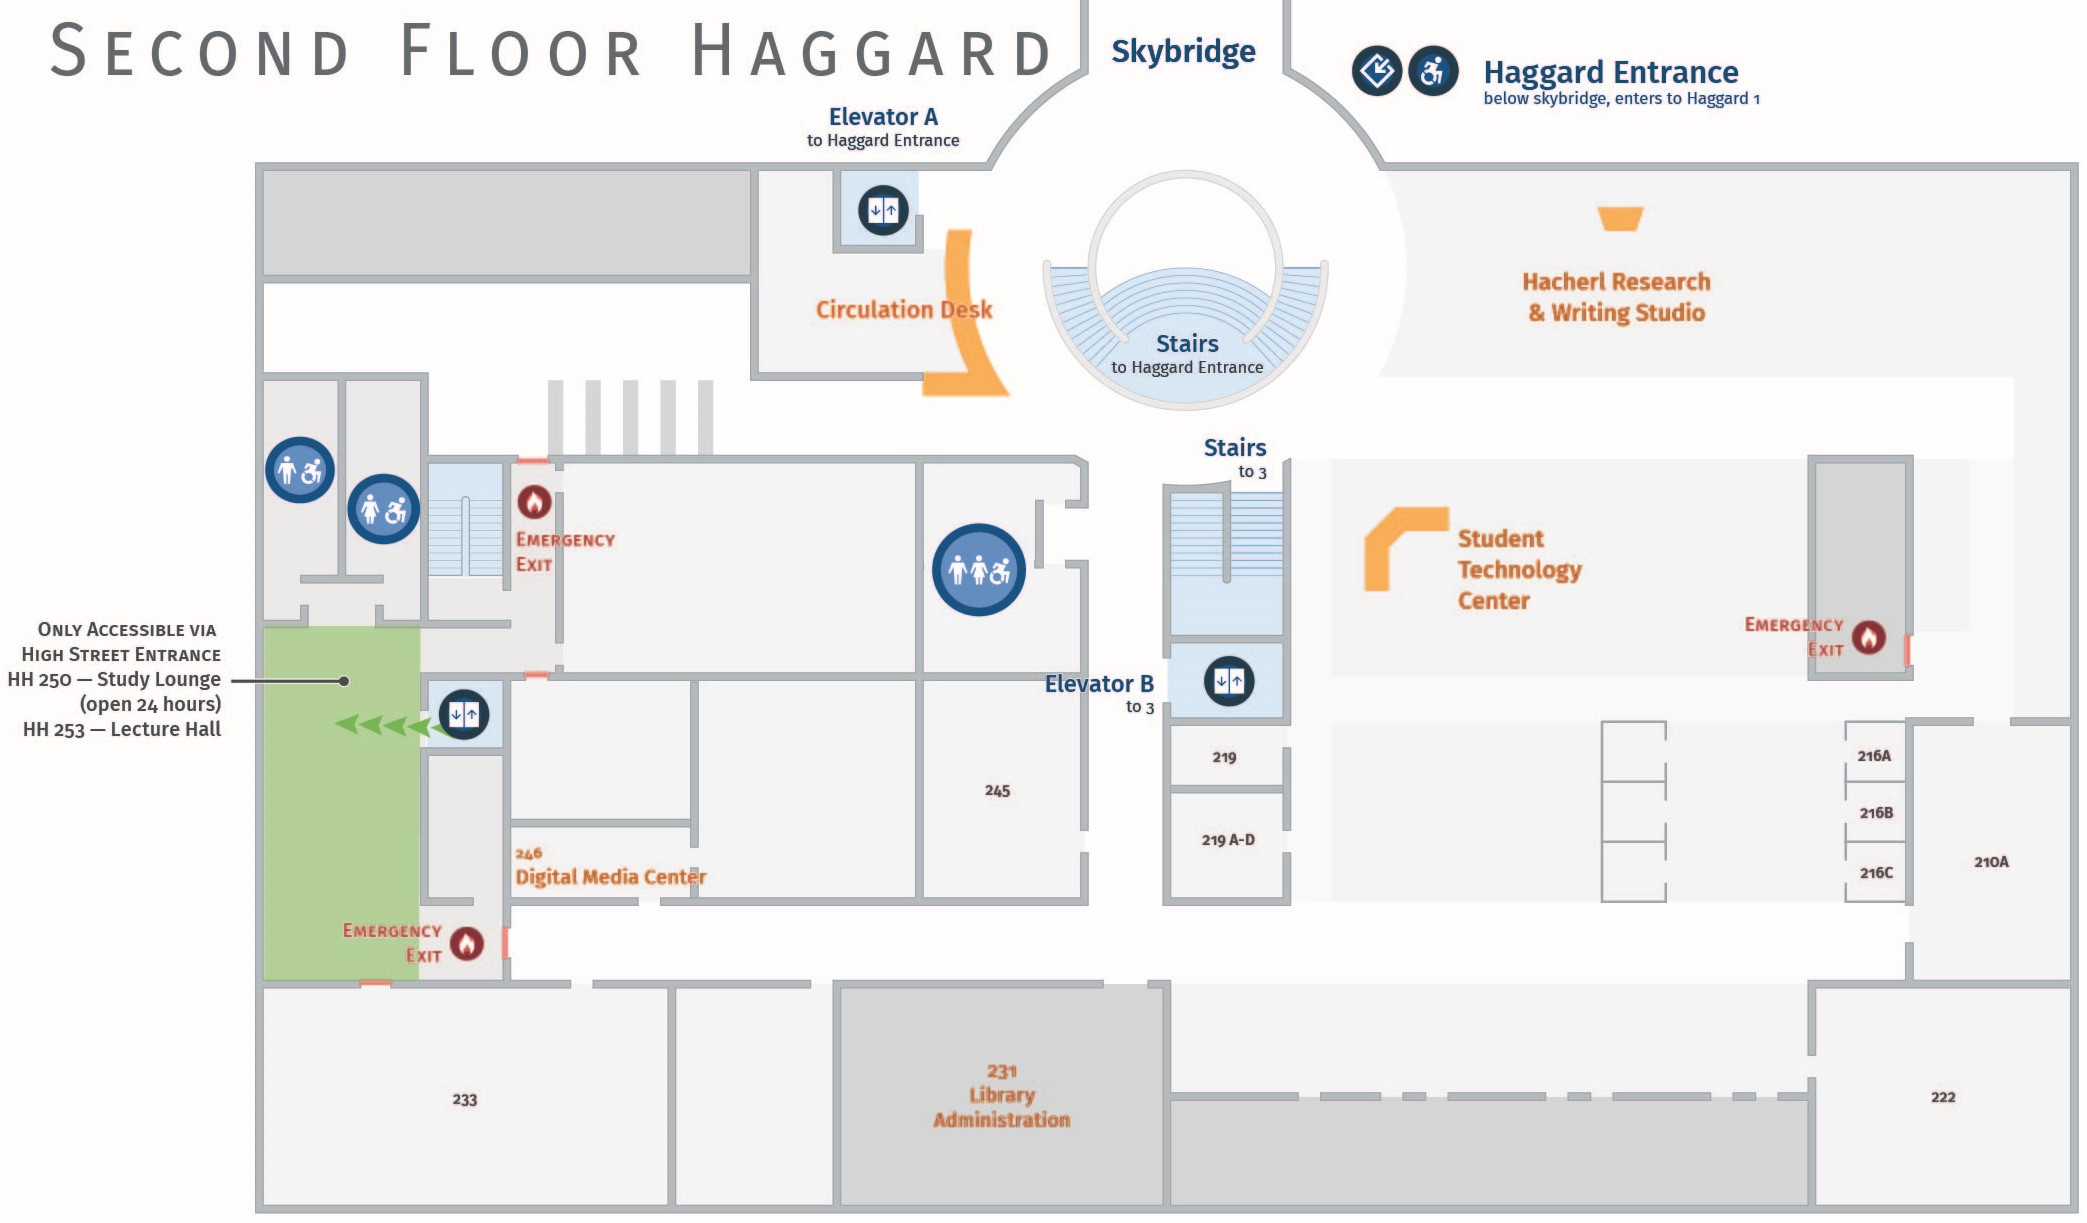 Floor plan, second floor of Haggard with accessible path to HH 250.